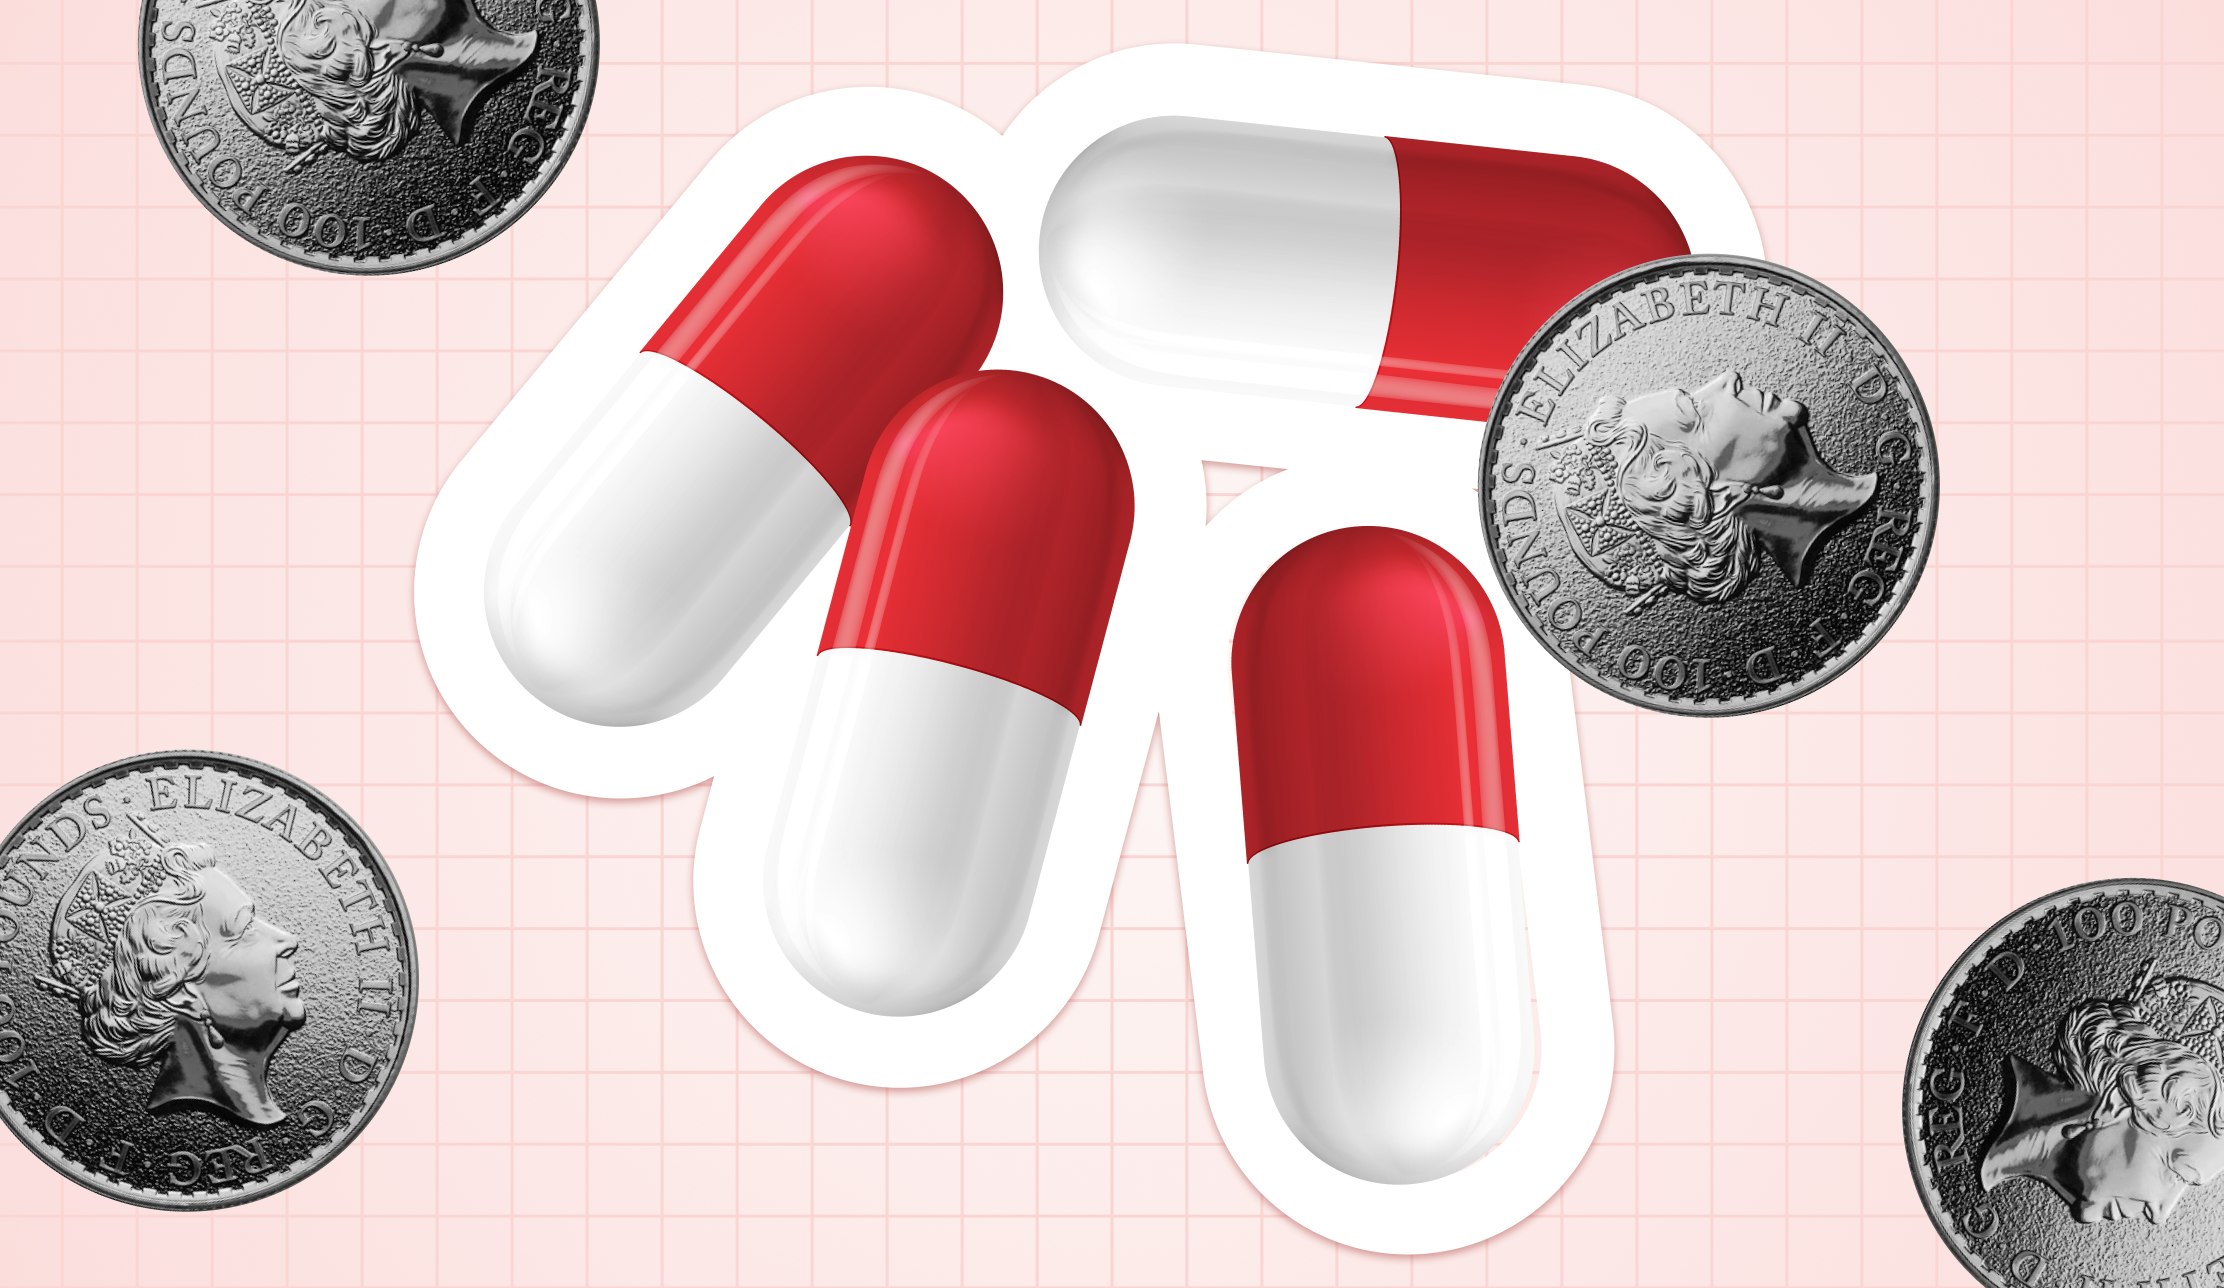 How to Start a Profitable Medical Delivery Service: Medicine pills and coins